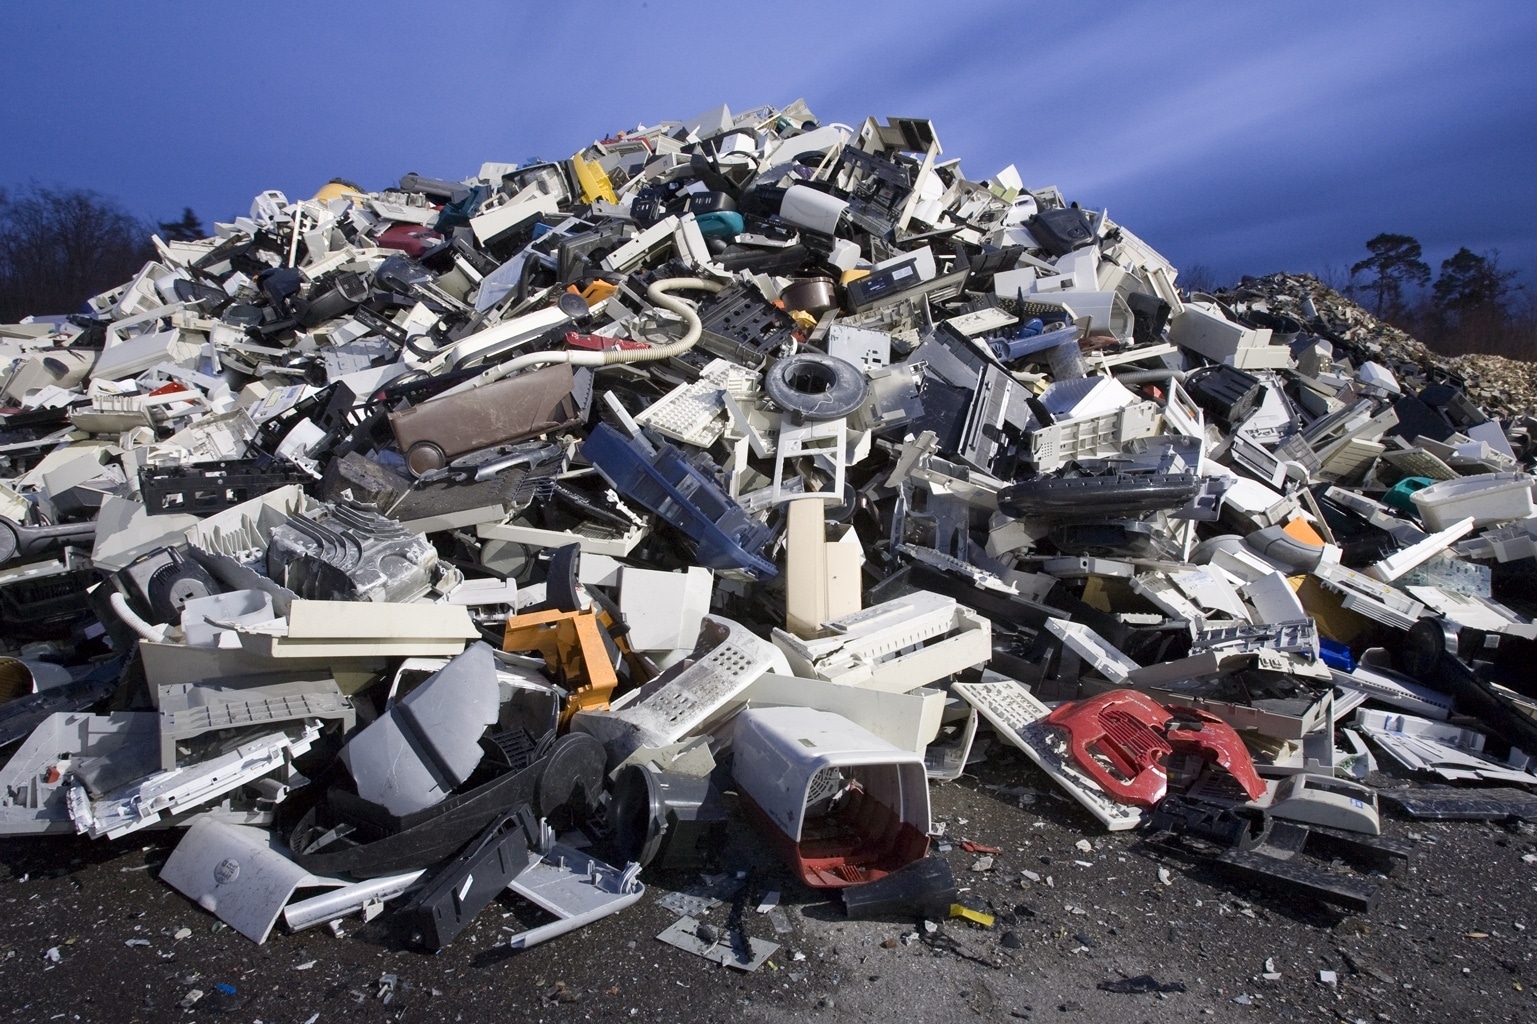 Apple had to pay $ 450,000 for not treating electronic waste properly